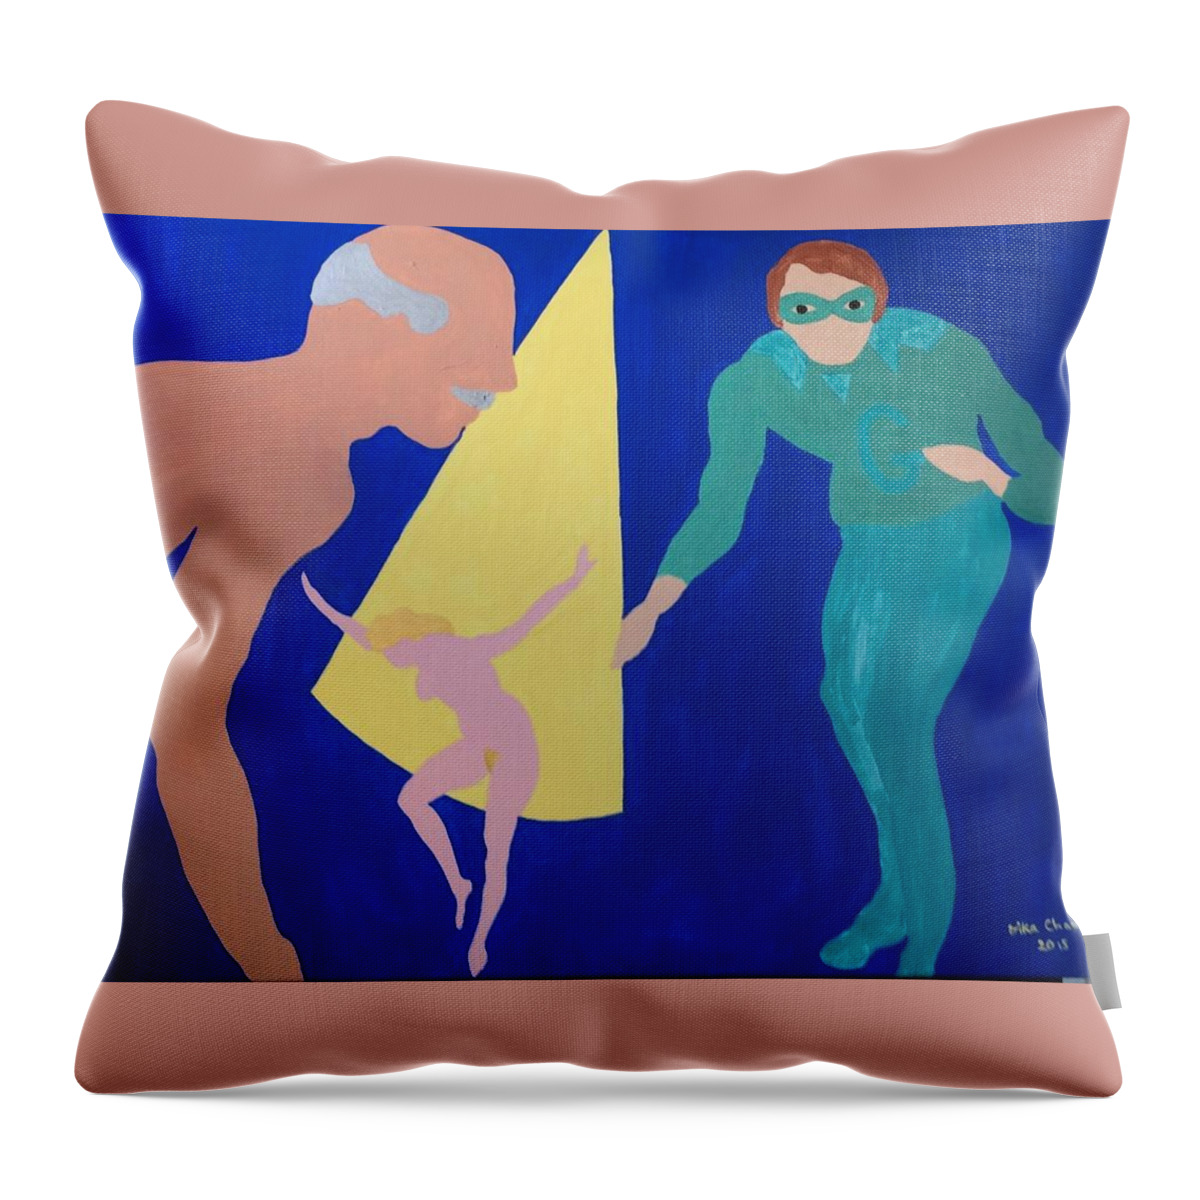 Marriage Counselor Throw Pillow featuring the painting Counselor by Erika Jean Chamberlin